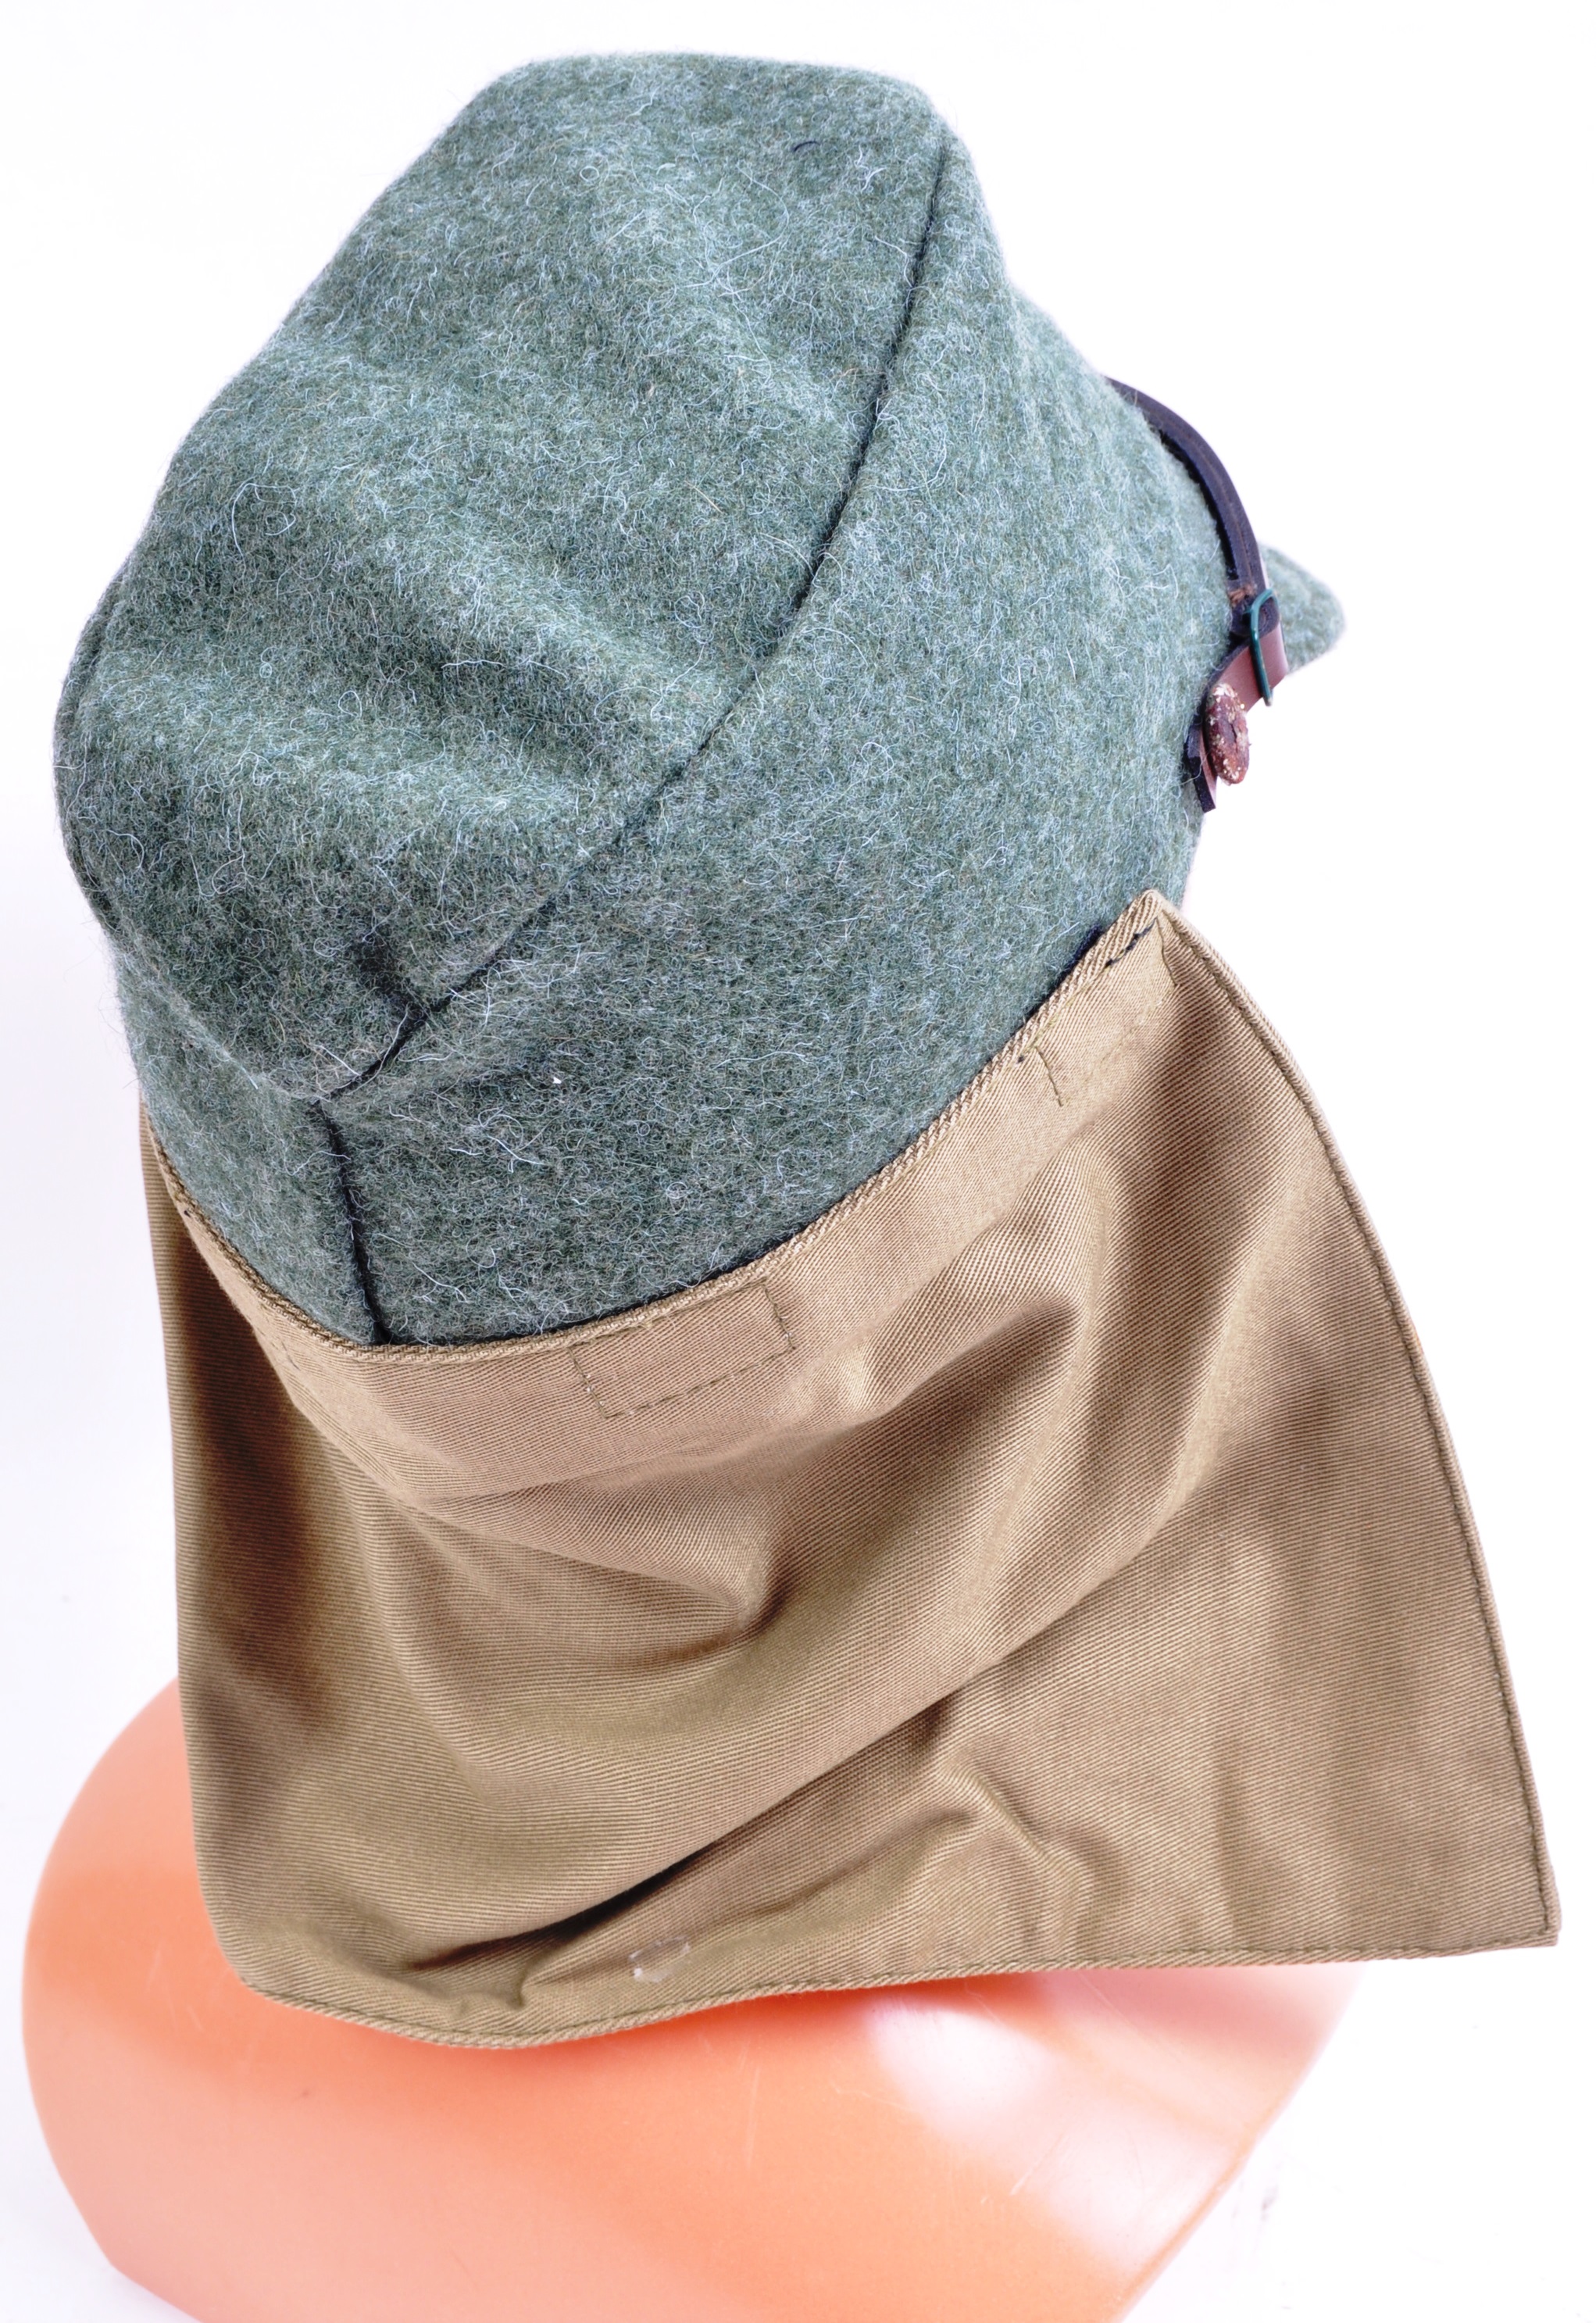 WWII SECOND WORLD WAR REPLICA JAPANESE FIELD CAP - Image 3 of 6